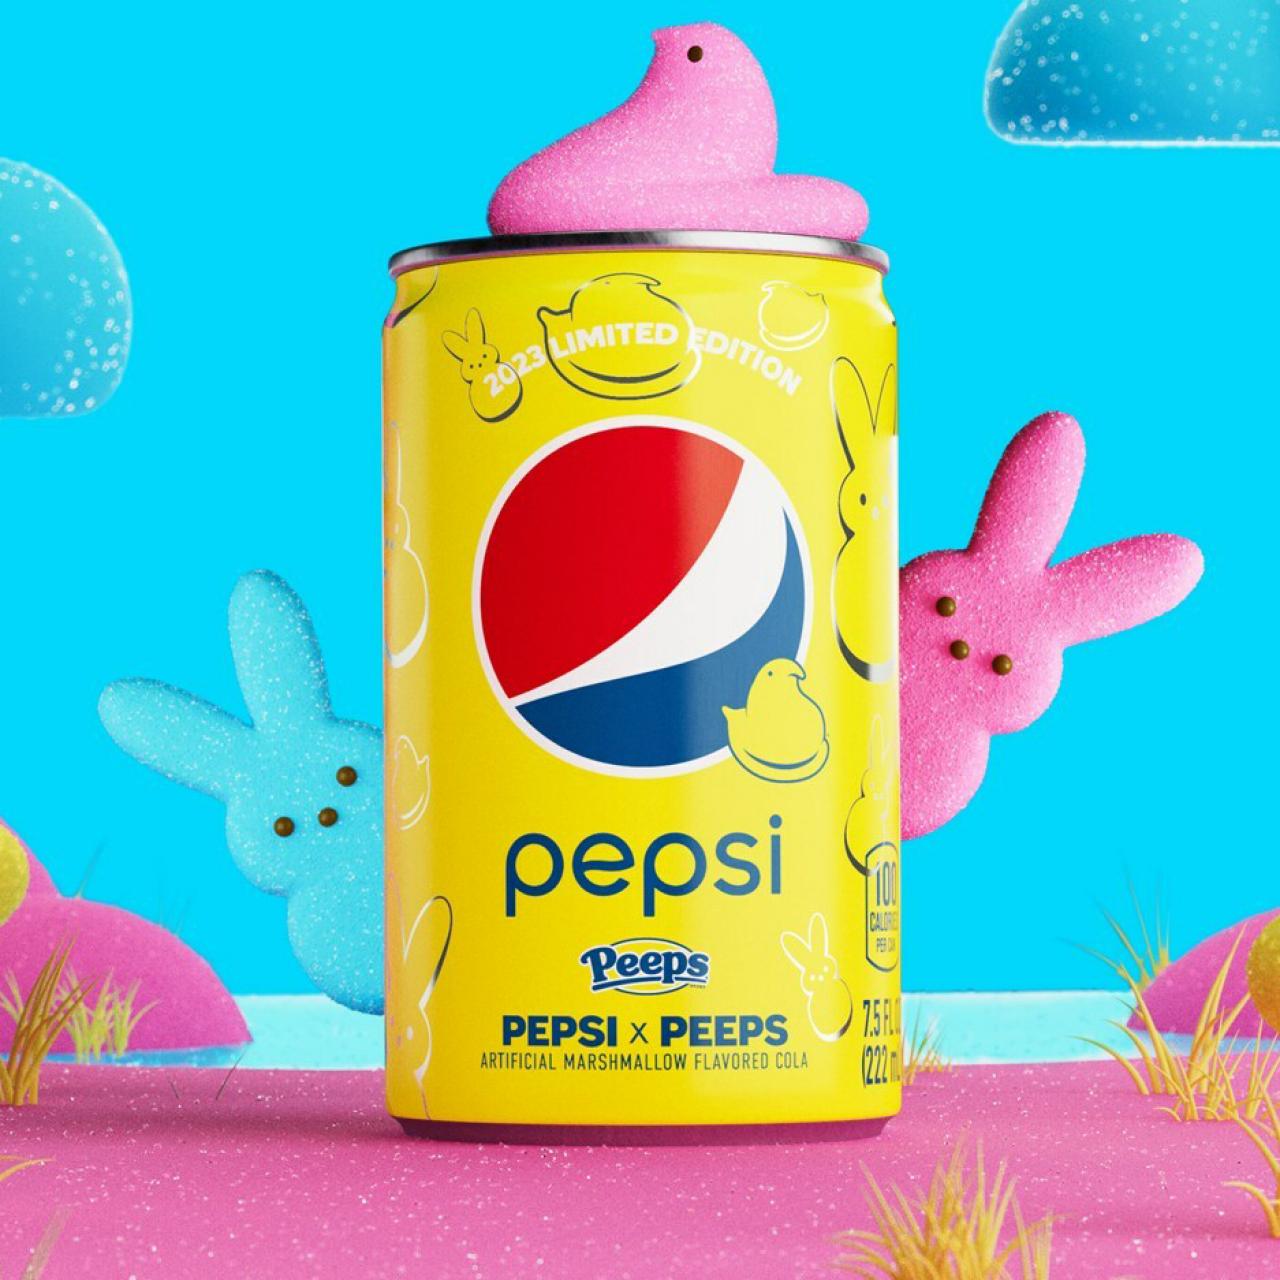 Where to Buy Peeps Pepsi : Dish Food | FN and Best Recipes Network Trends, | Food Behind-the-Scenes, Food - Network